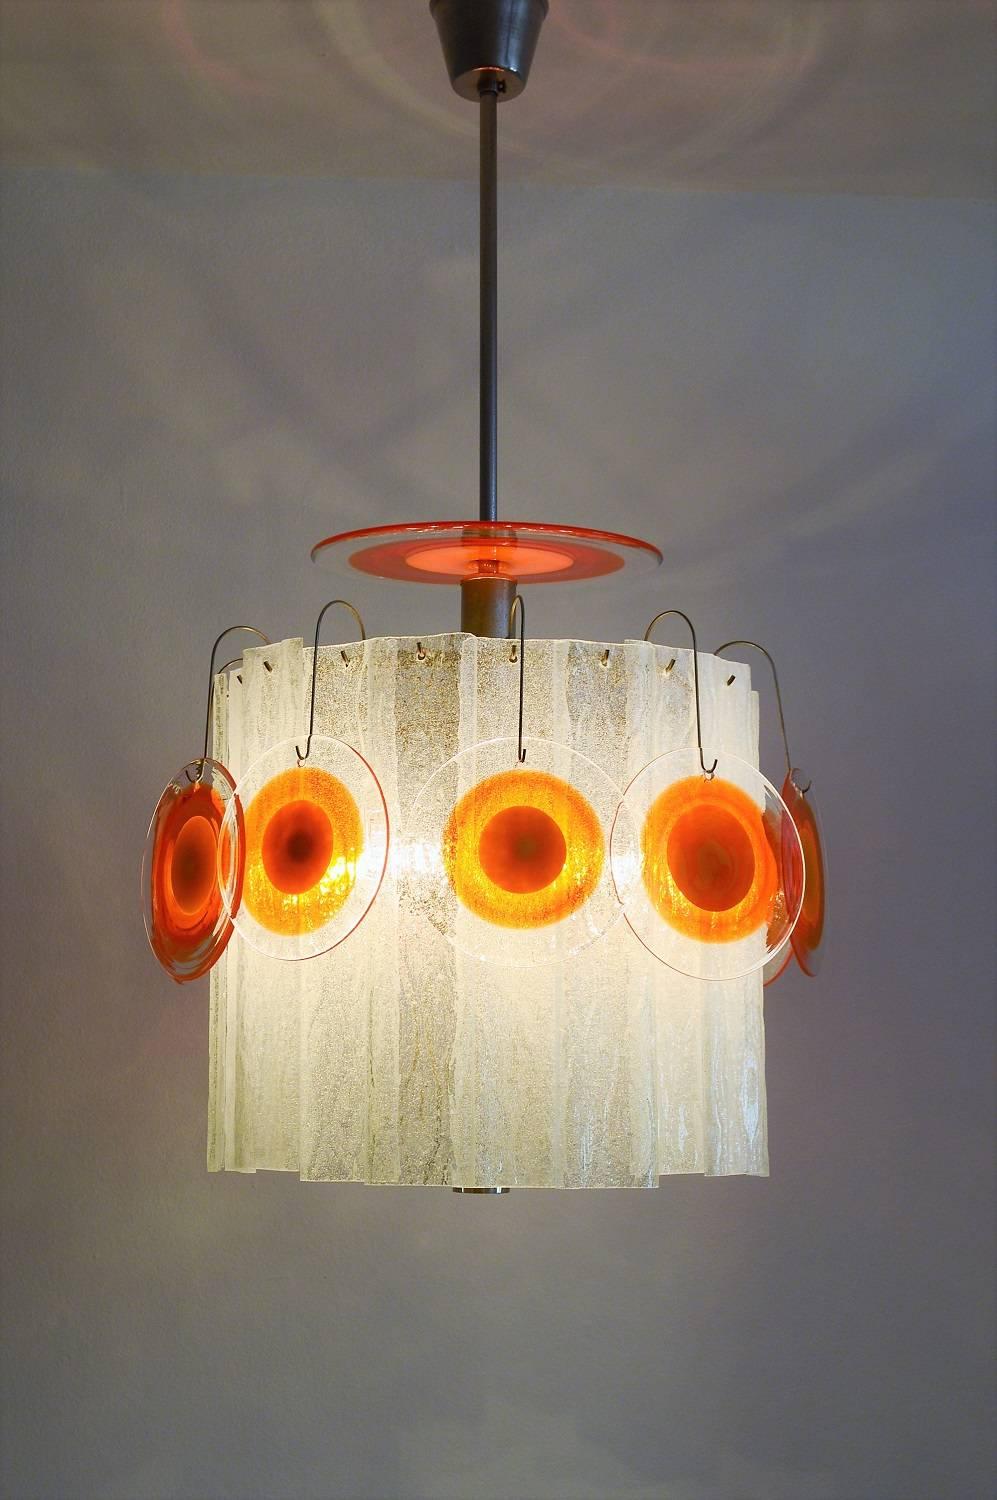 Rare and beautiful Pop Art chandelier in Carlo Nason Style with 20 long milky glasses, ten round small and one big orange swirled glasses.
Made in Italy by Vistosi in the 1970s.
The orange glasses are grouped outside around the circle of white long